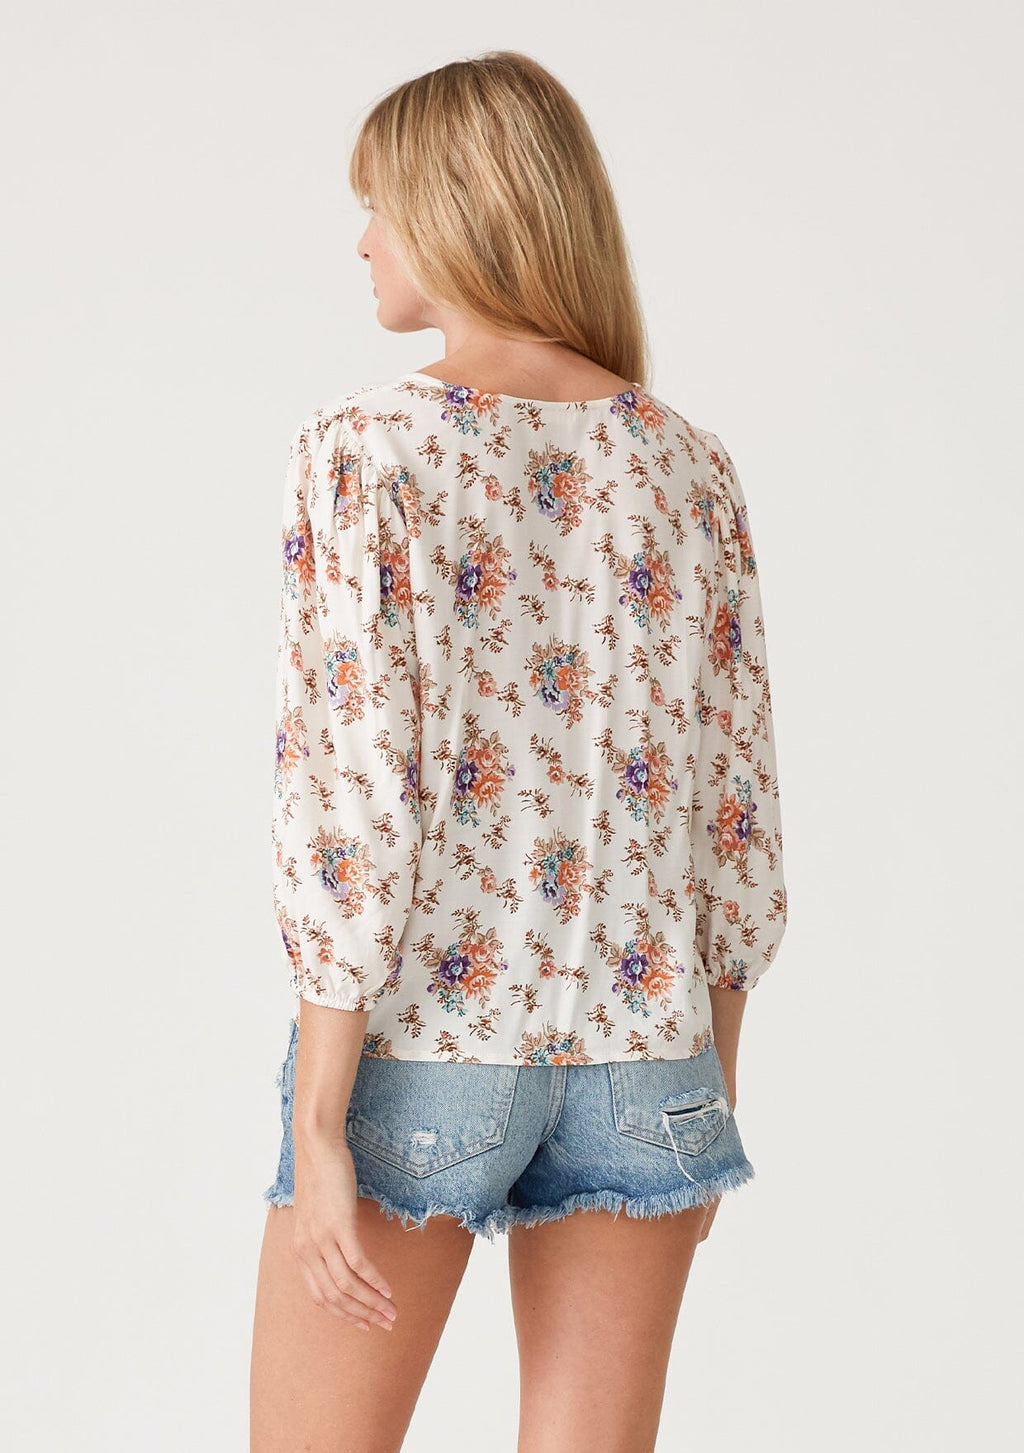 Lovestitch Floral Tie Front Top